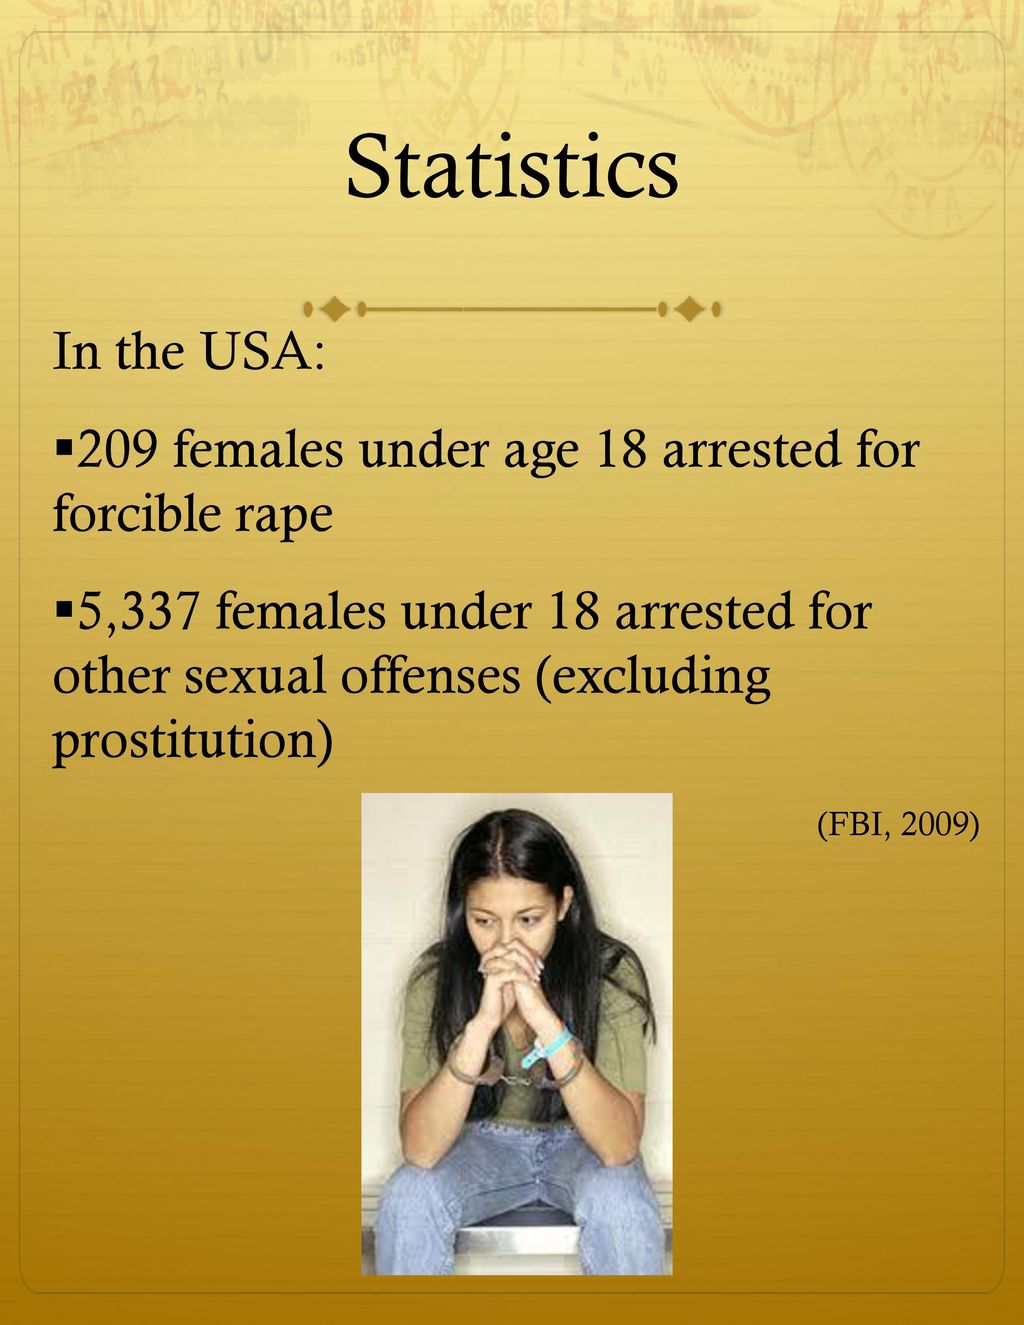 6/9/2018 Statistics. In the USA: 209 females under age 18 arrested for forcible rape.